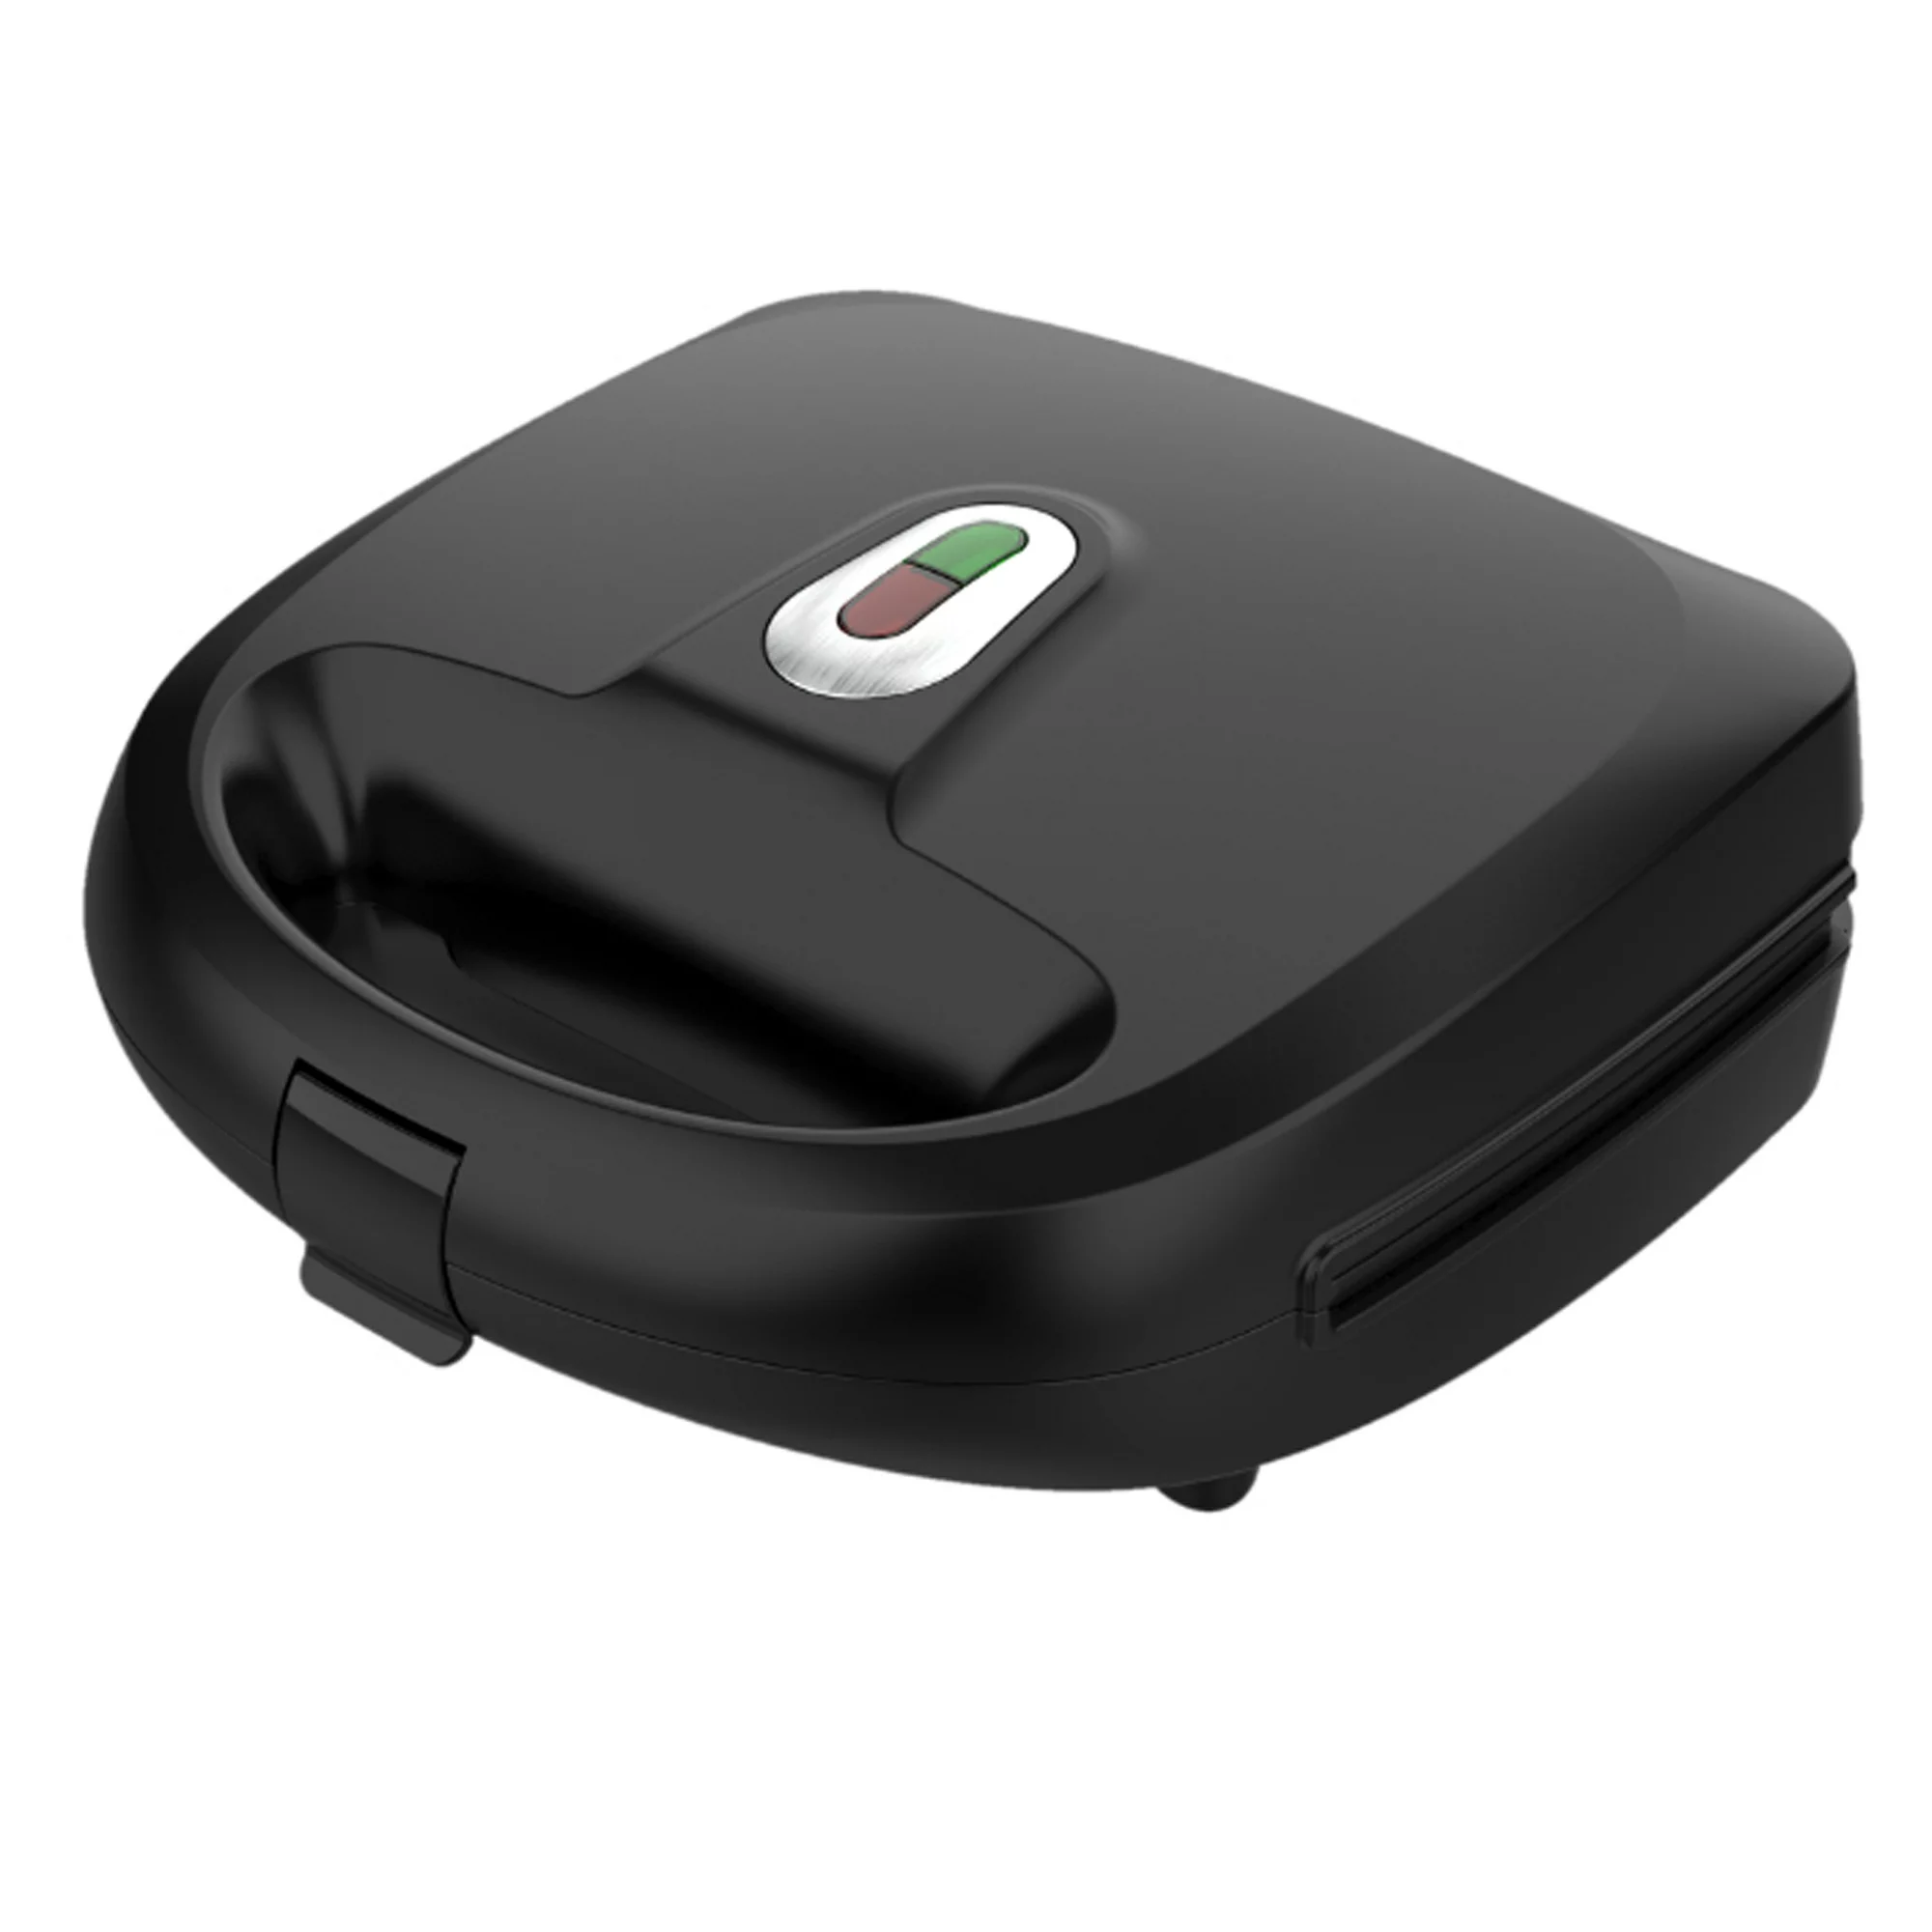 Mainstays Black 2 in 1 Waffle and Sandwich Maker, Nonstick, Removable Pl... - $78.86